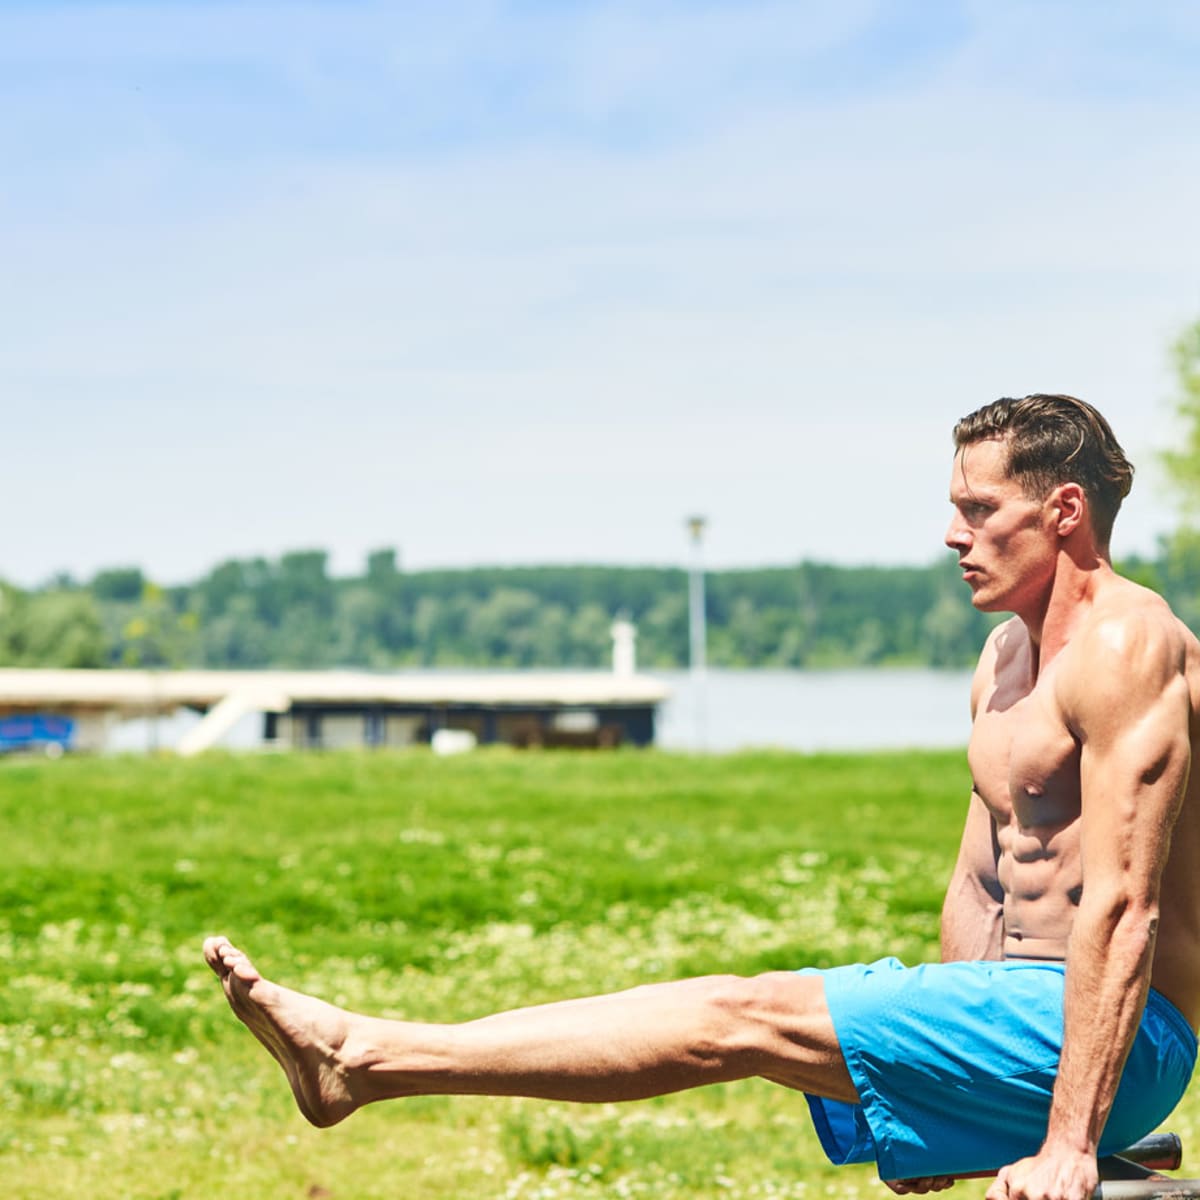 Muscle & Fitness: Take Your Workout Anywhere With These Outdoor